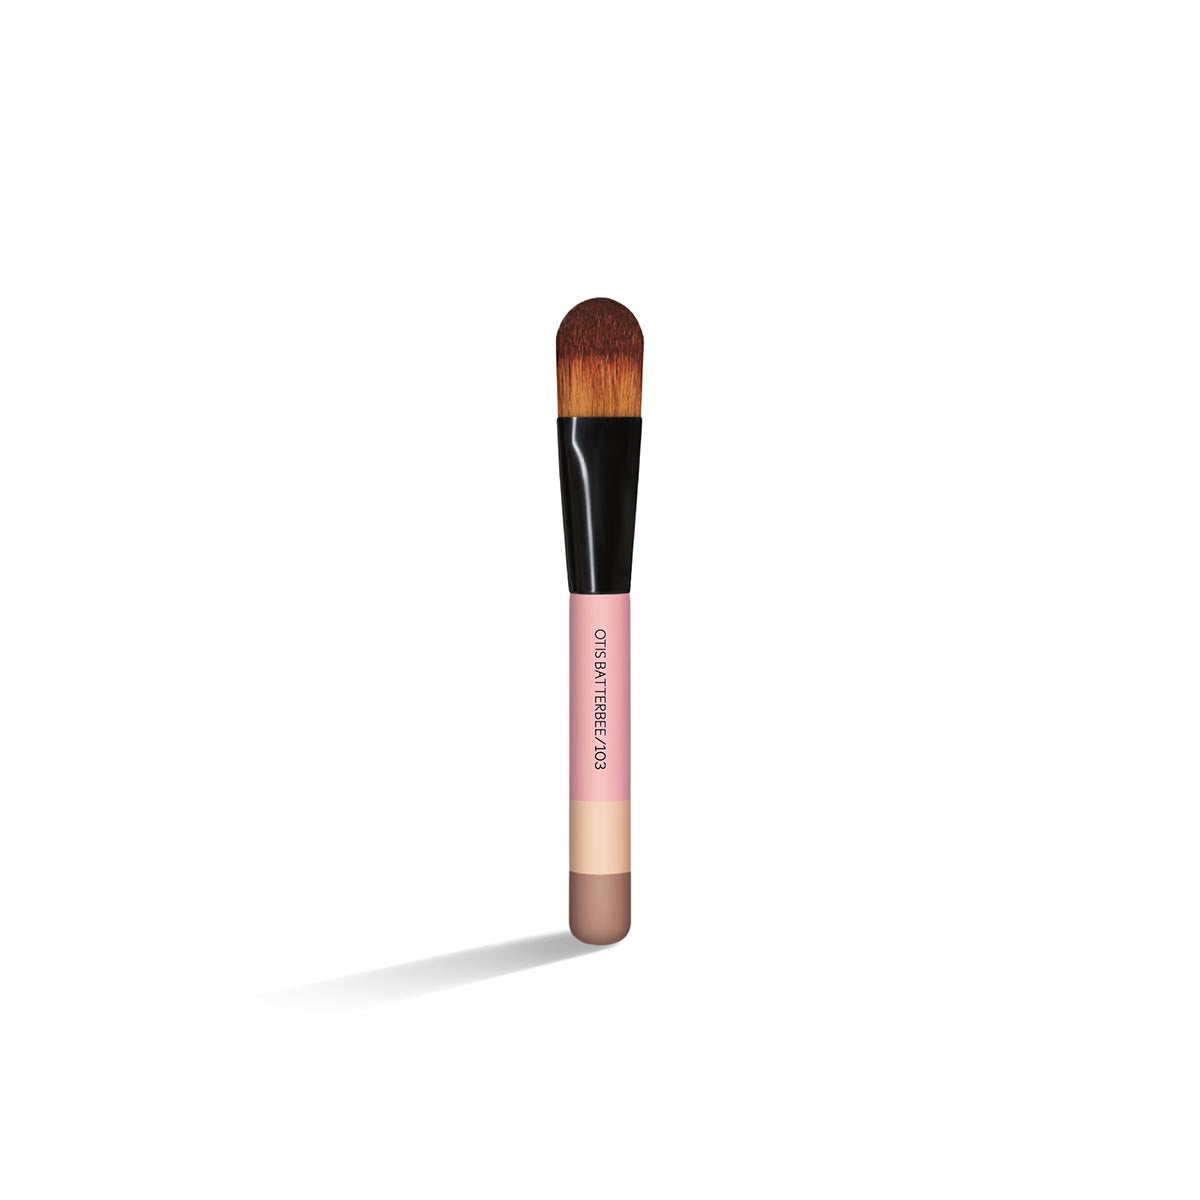 Otis Batterbee Blusher Brush 102 – Crafted with our unique, high-performing bristles designed to pick up the perfect amount of product for a natural, radiant look.